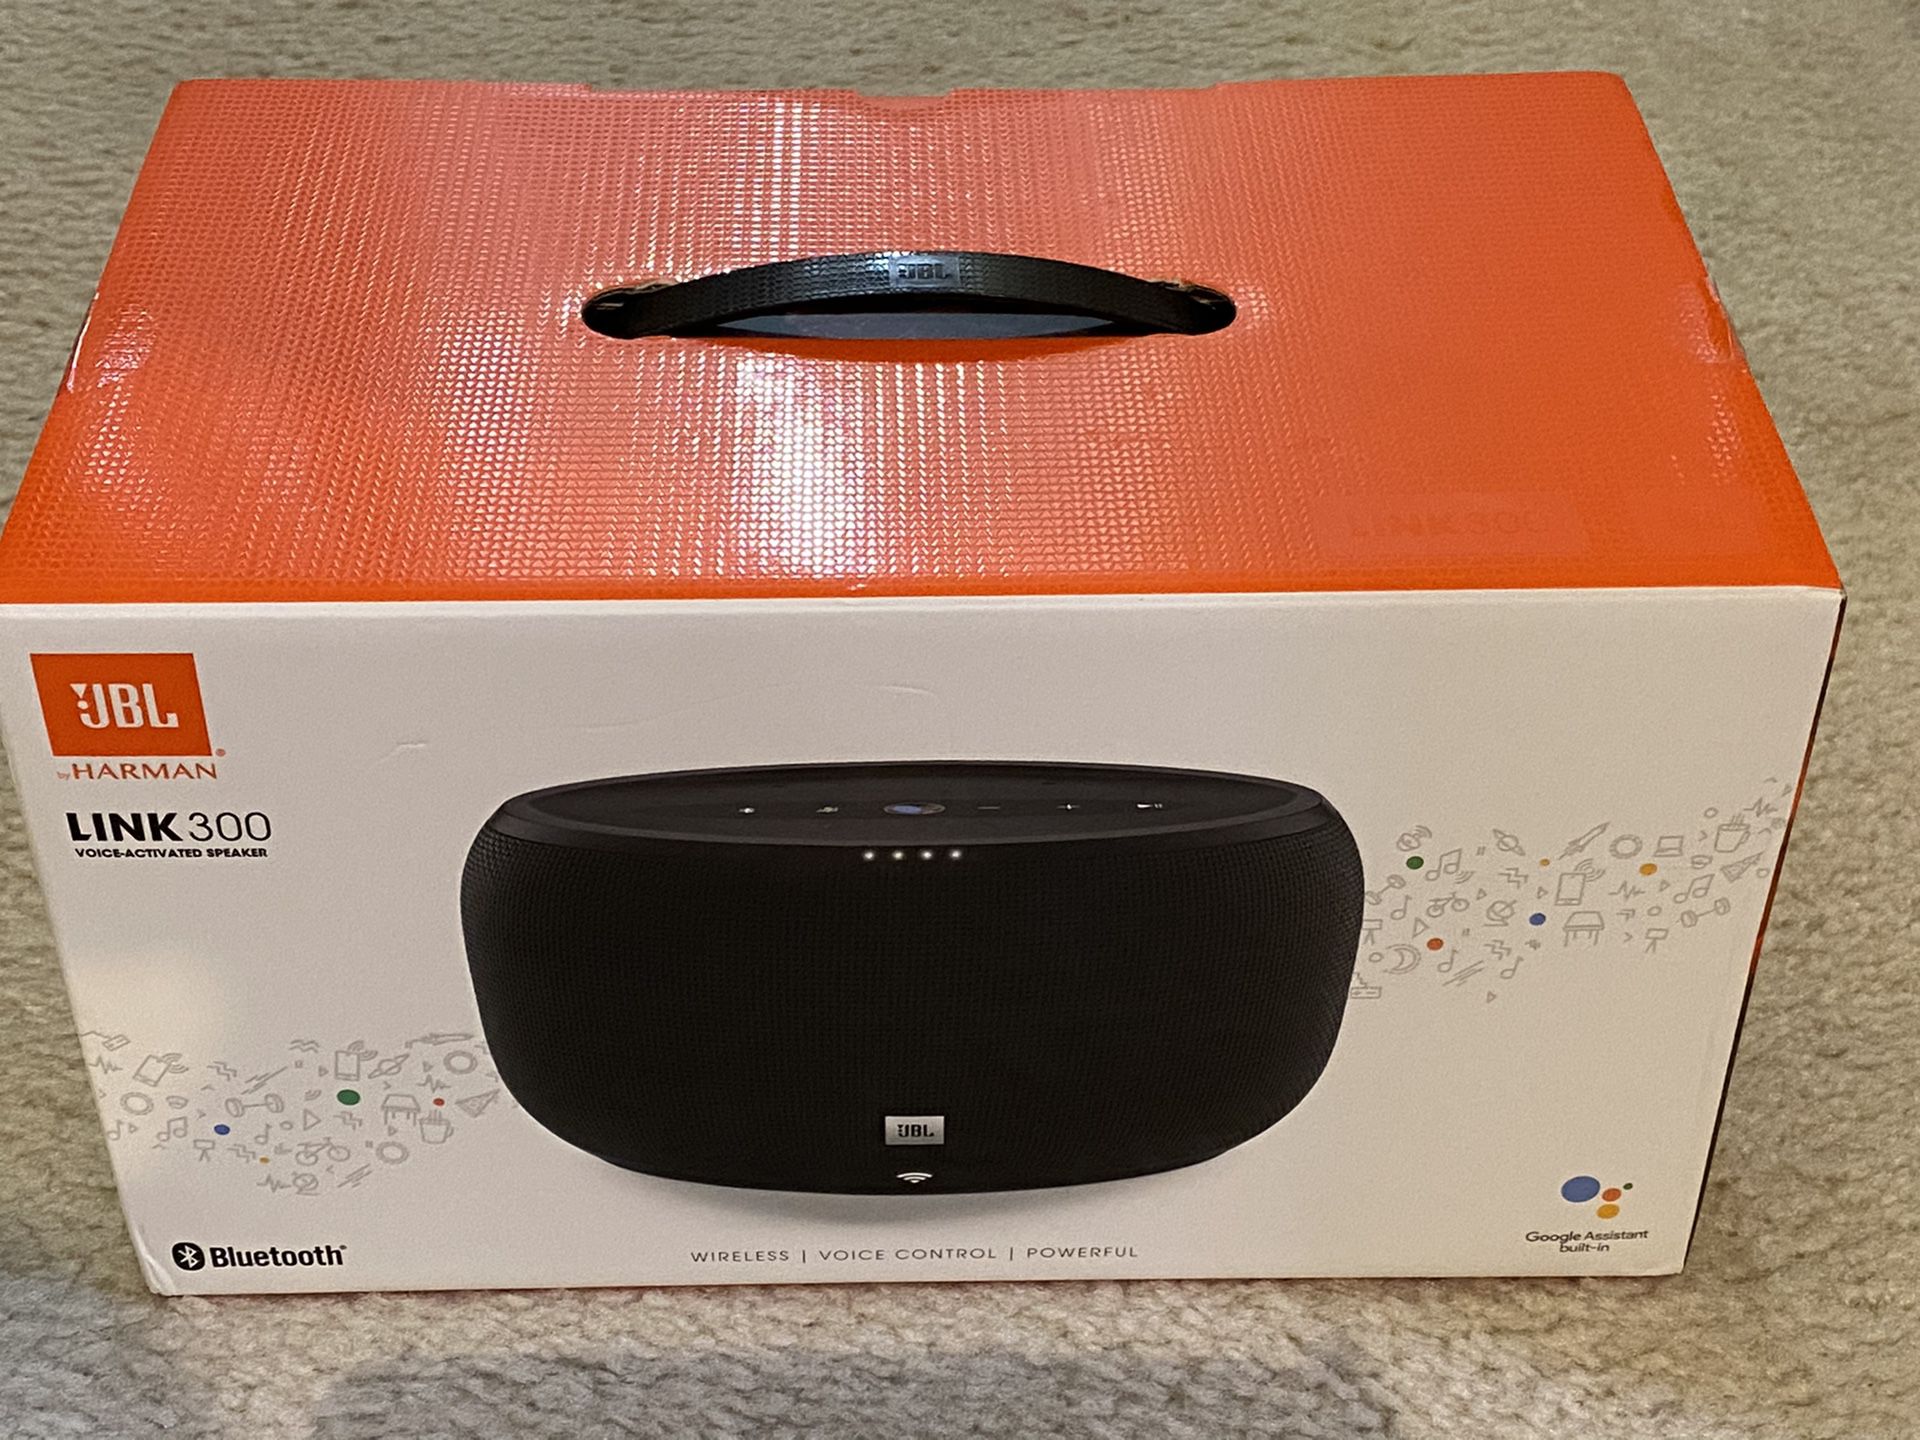 JBL by Harman link 300 voice-activated speaker with google assistant sealed.